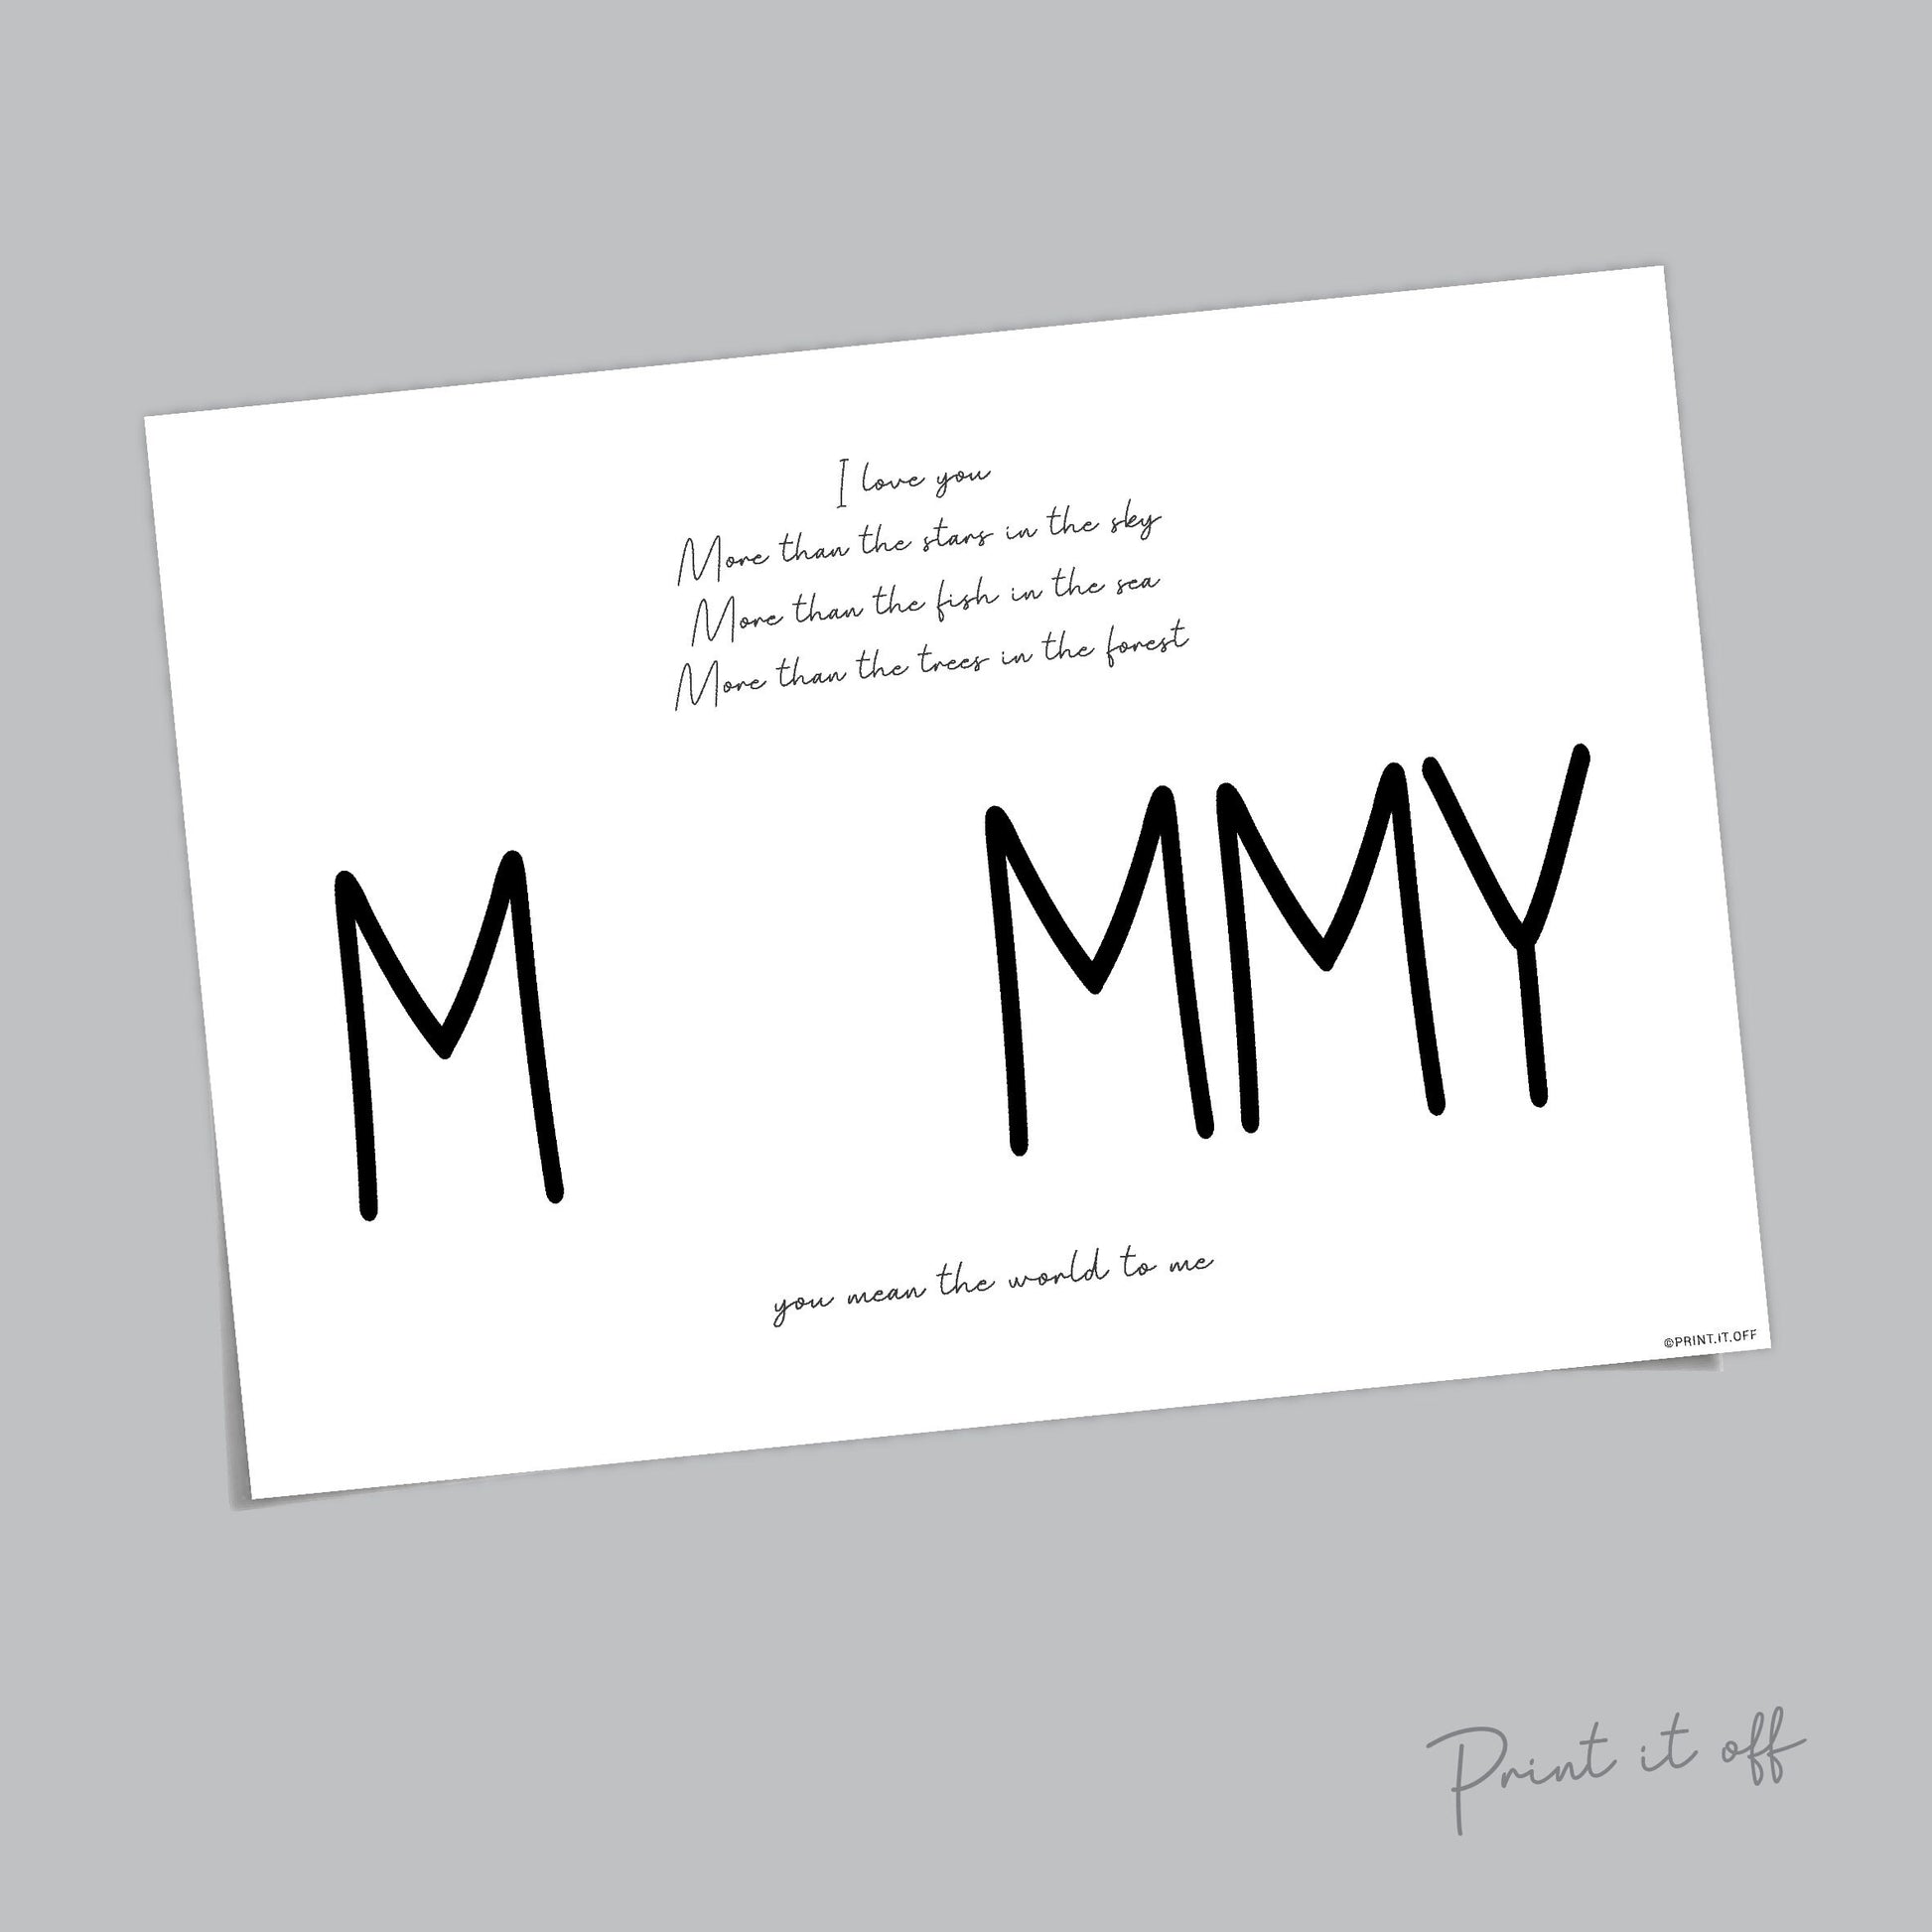 You Mean The World To Me / Mother's Day Poem / Mommy Mummy / Handprint Art / Kids Baby Toddler / Keepsake Craft DIY Gift Card Print 0186